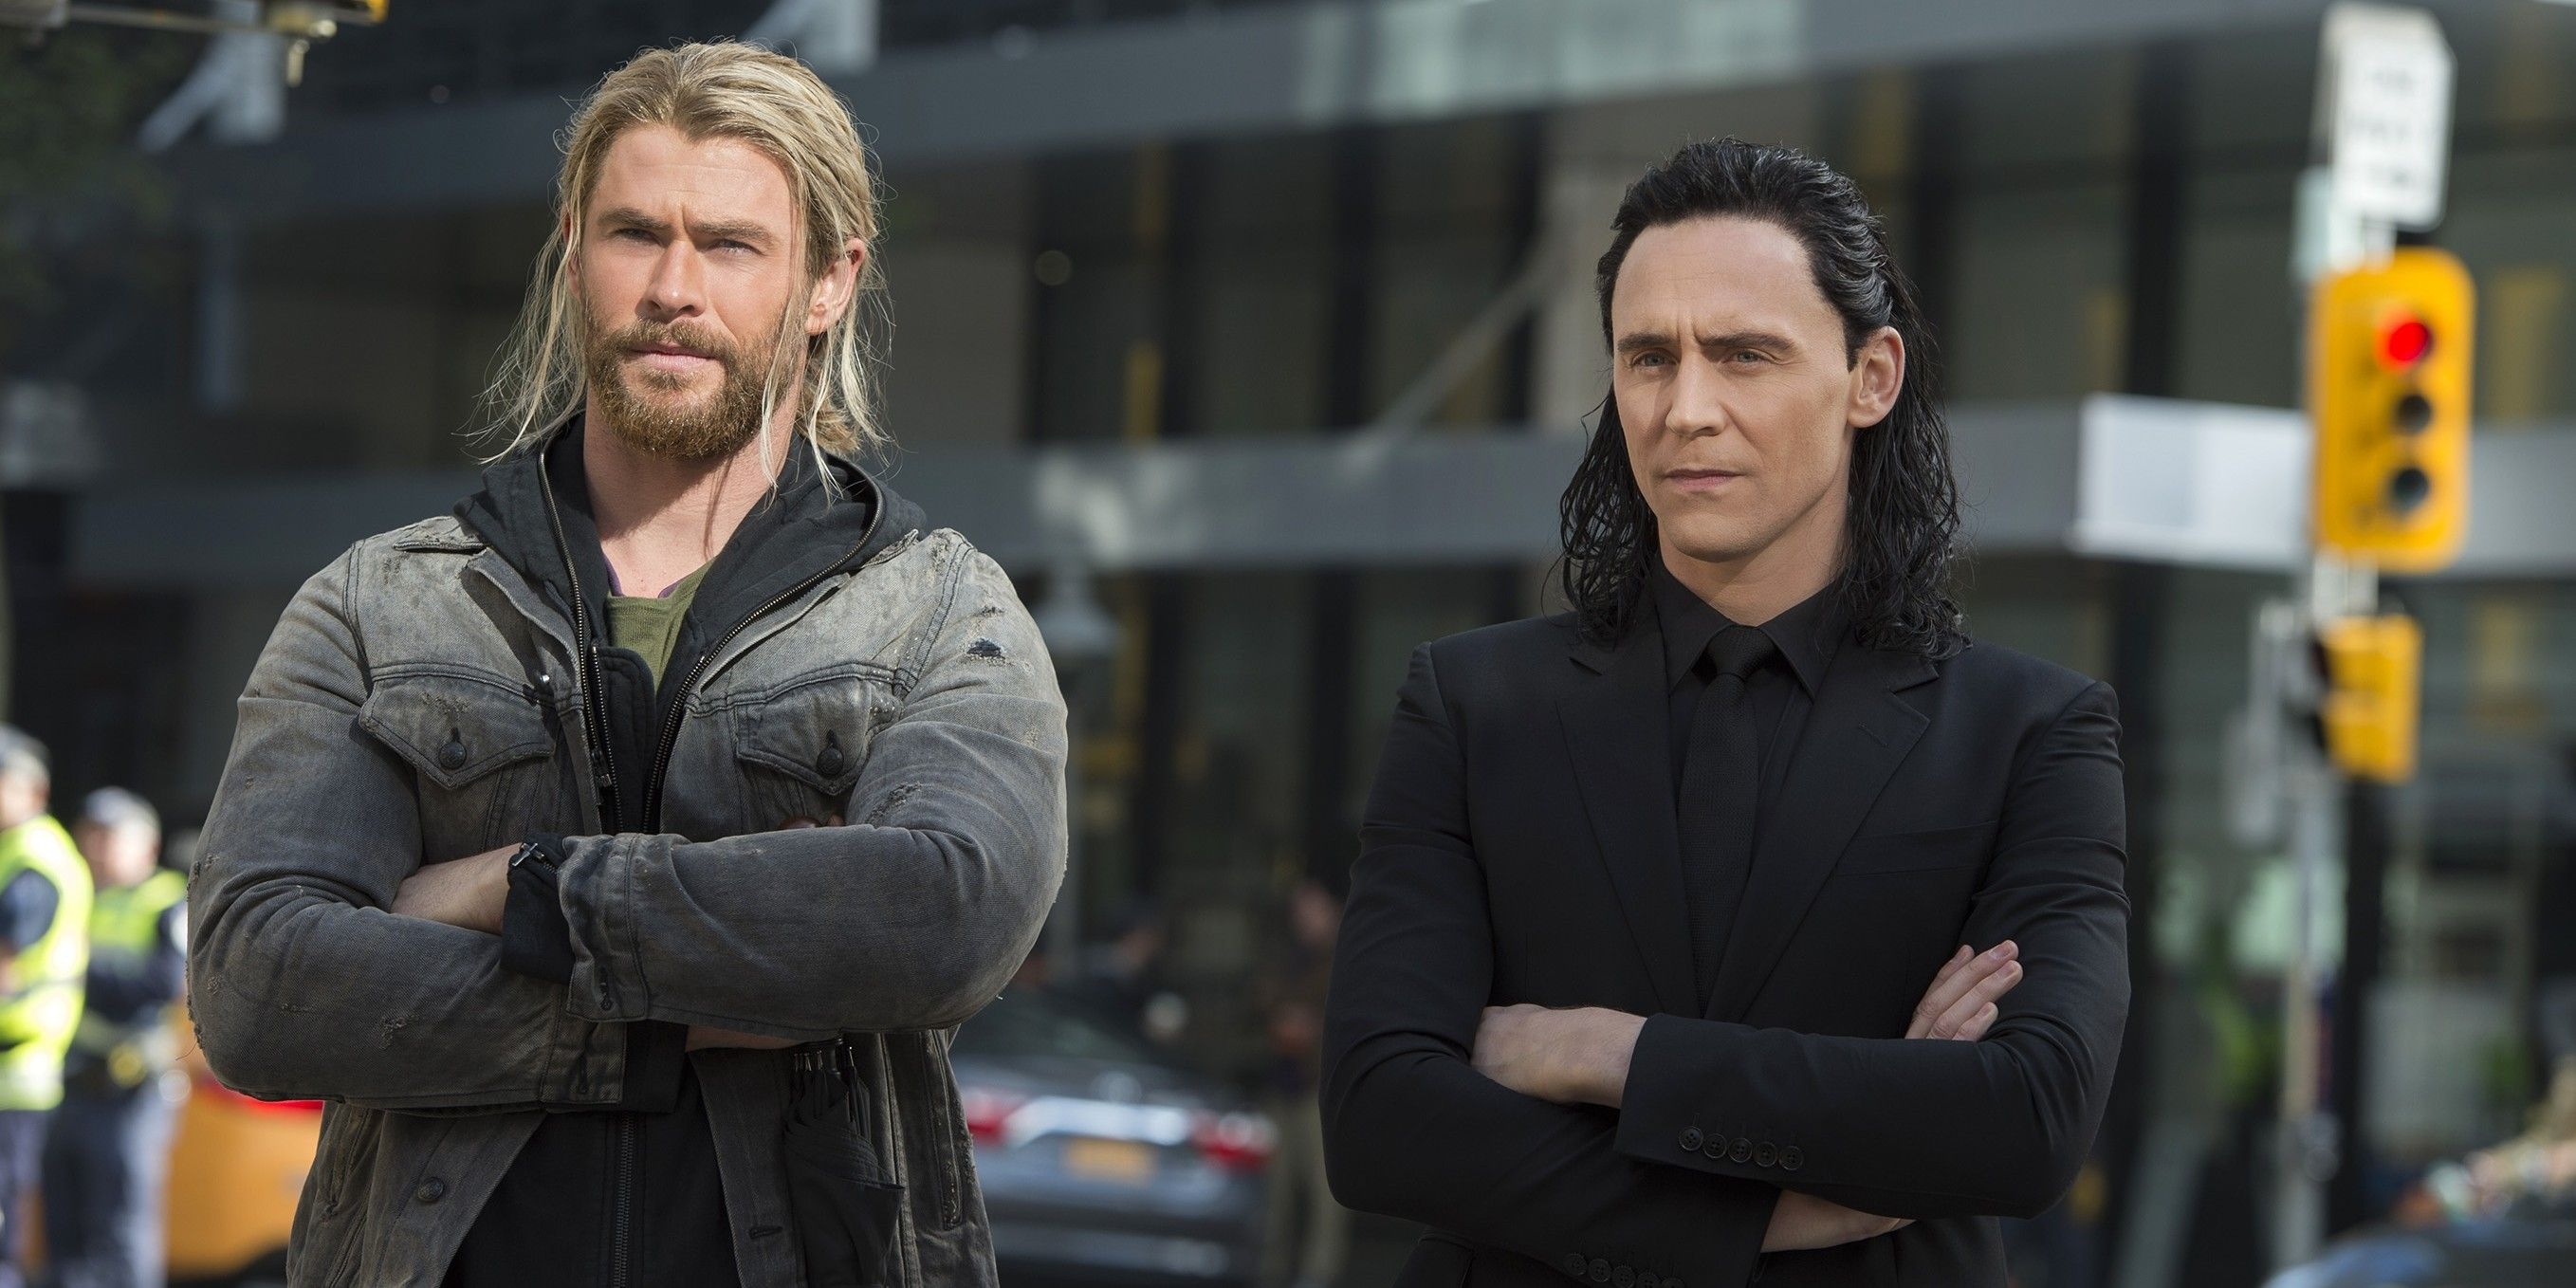 Thor standing with arms crossed beside Loki on city street